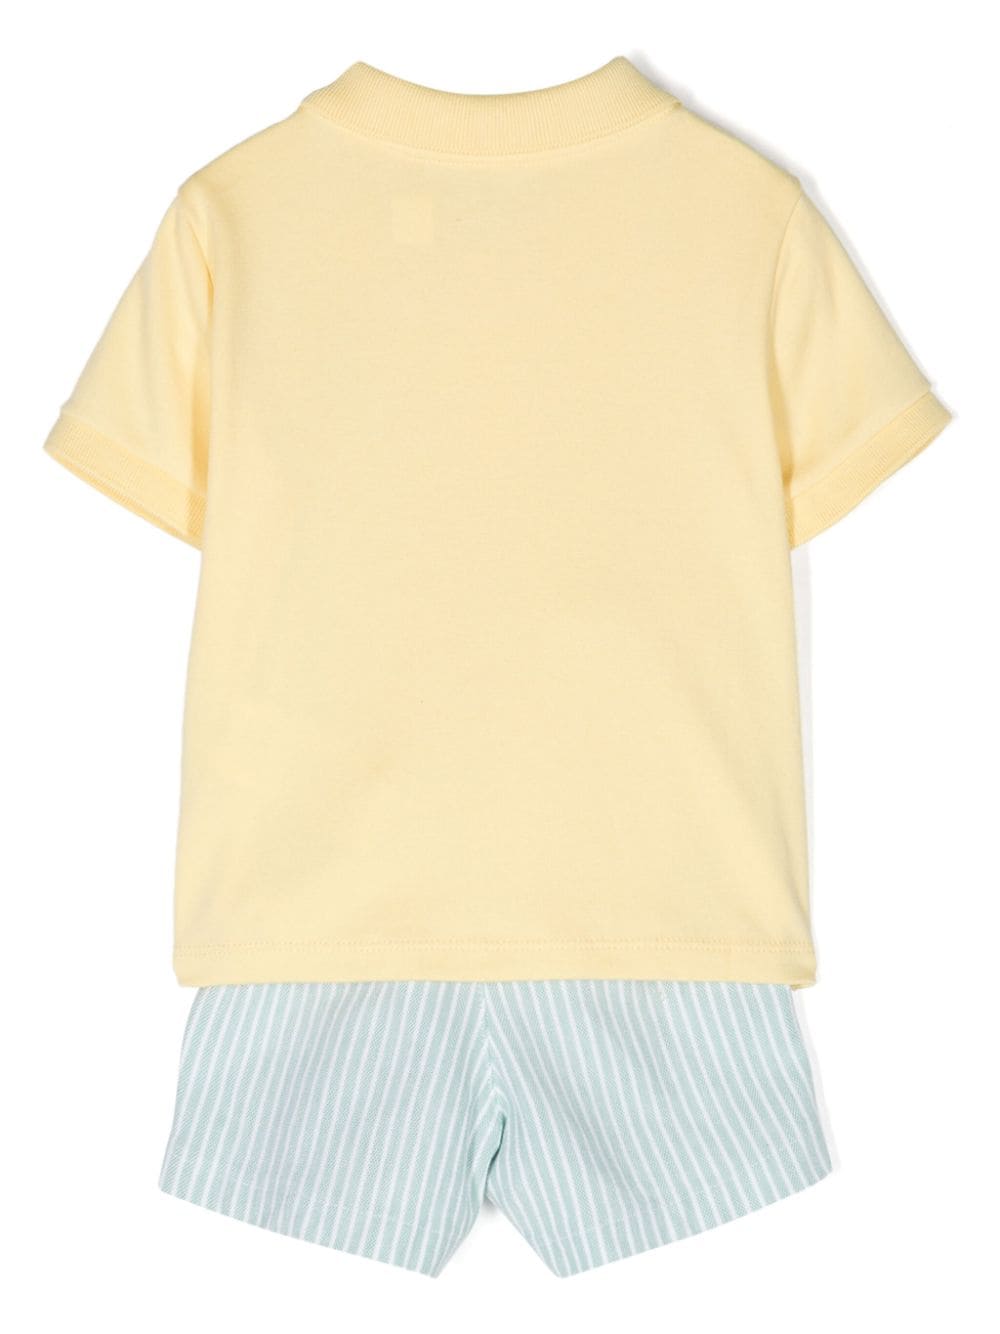 Yellow and blue baby outfit with logo